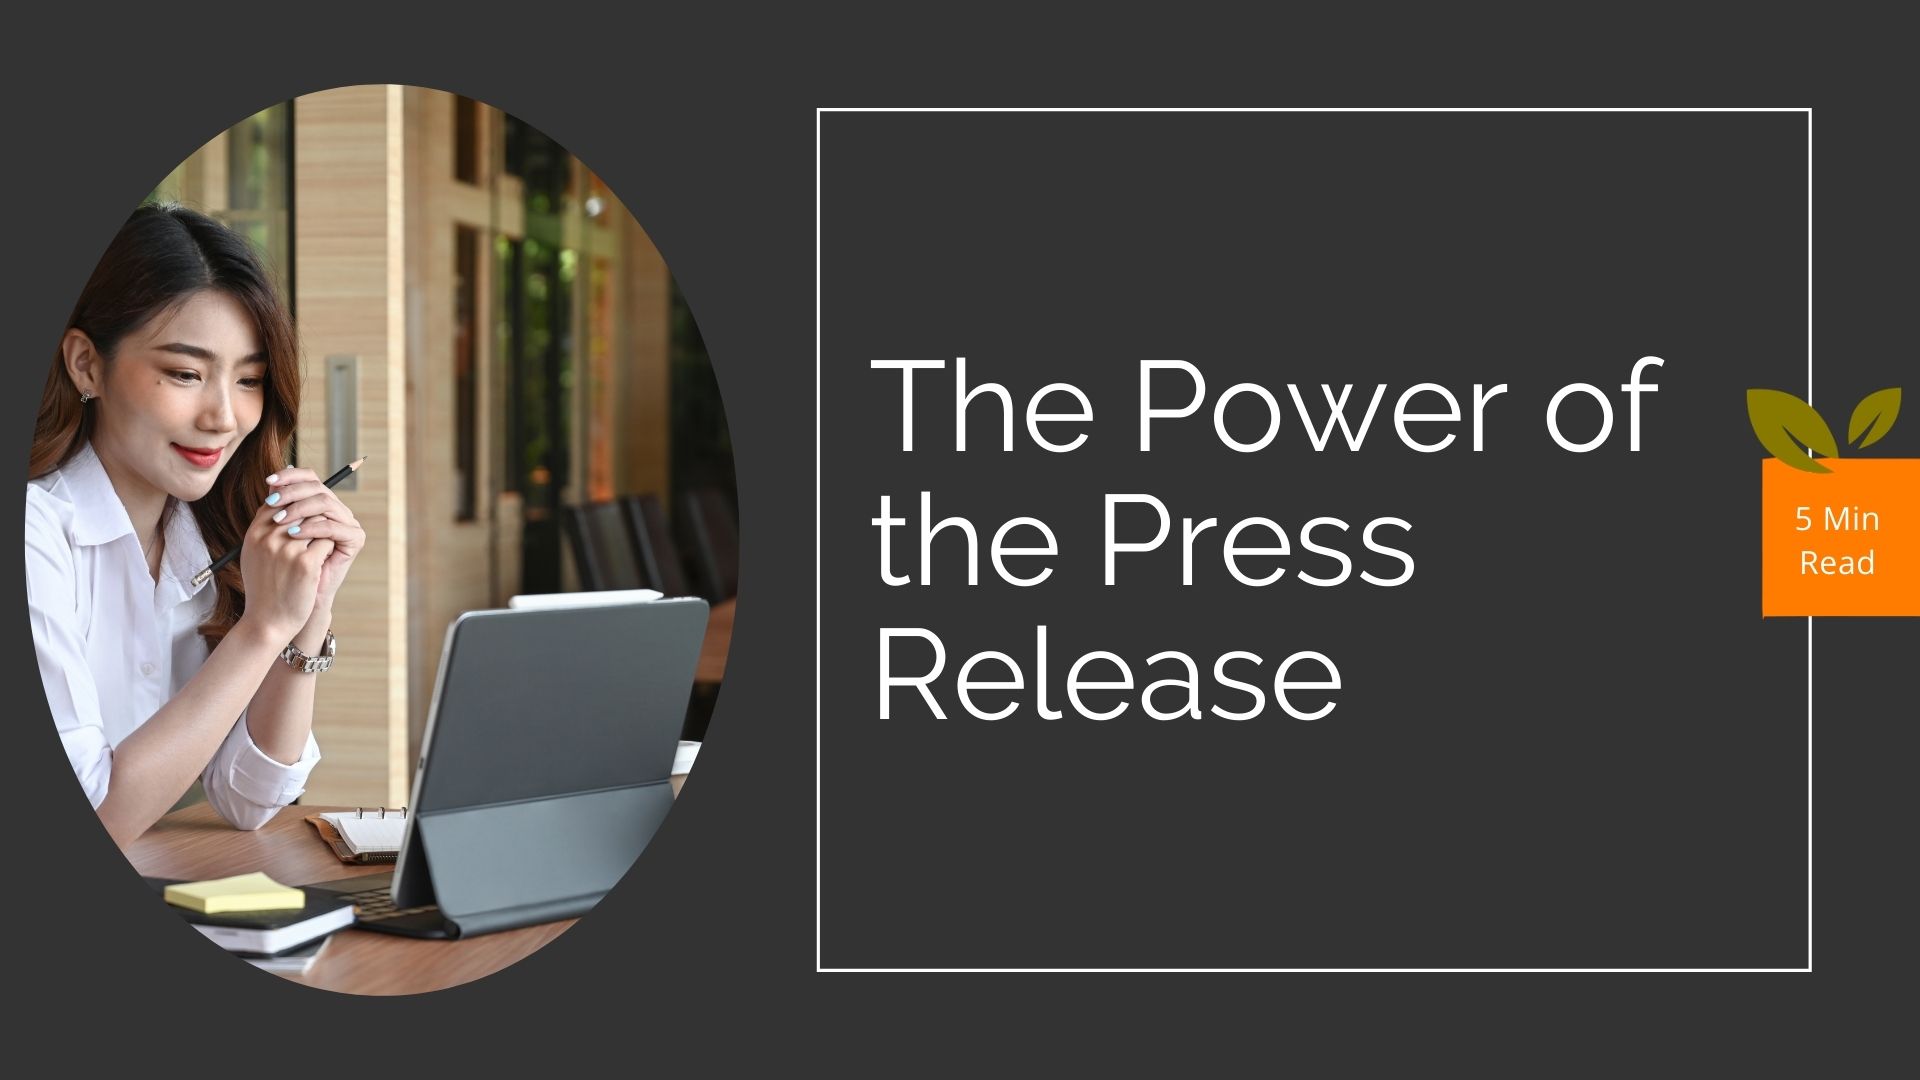 How to use a press release